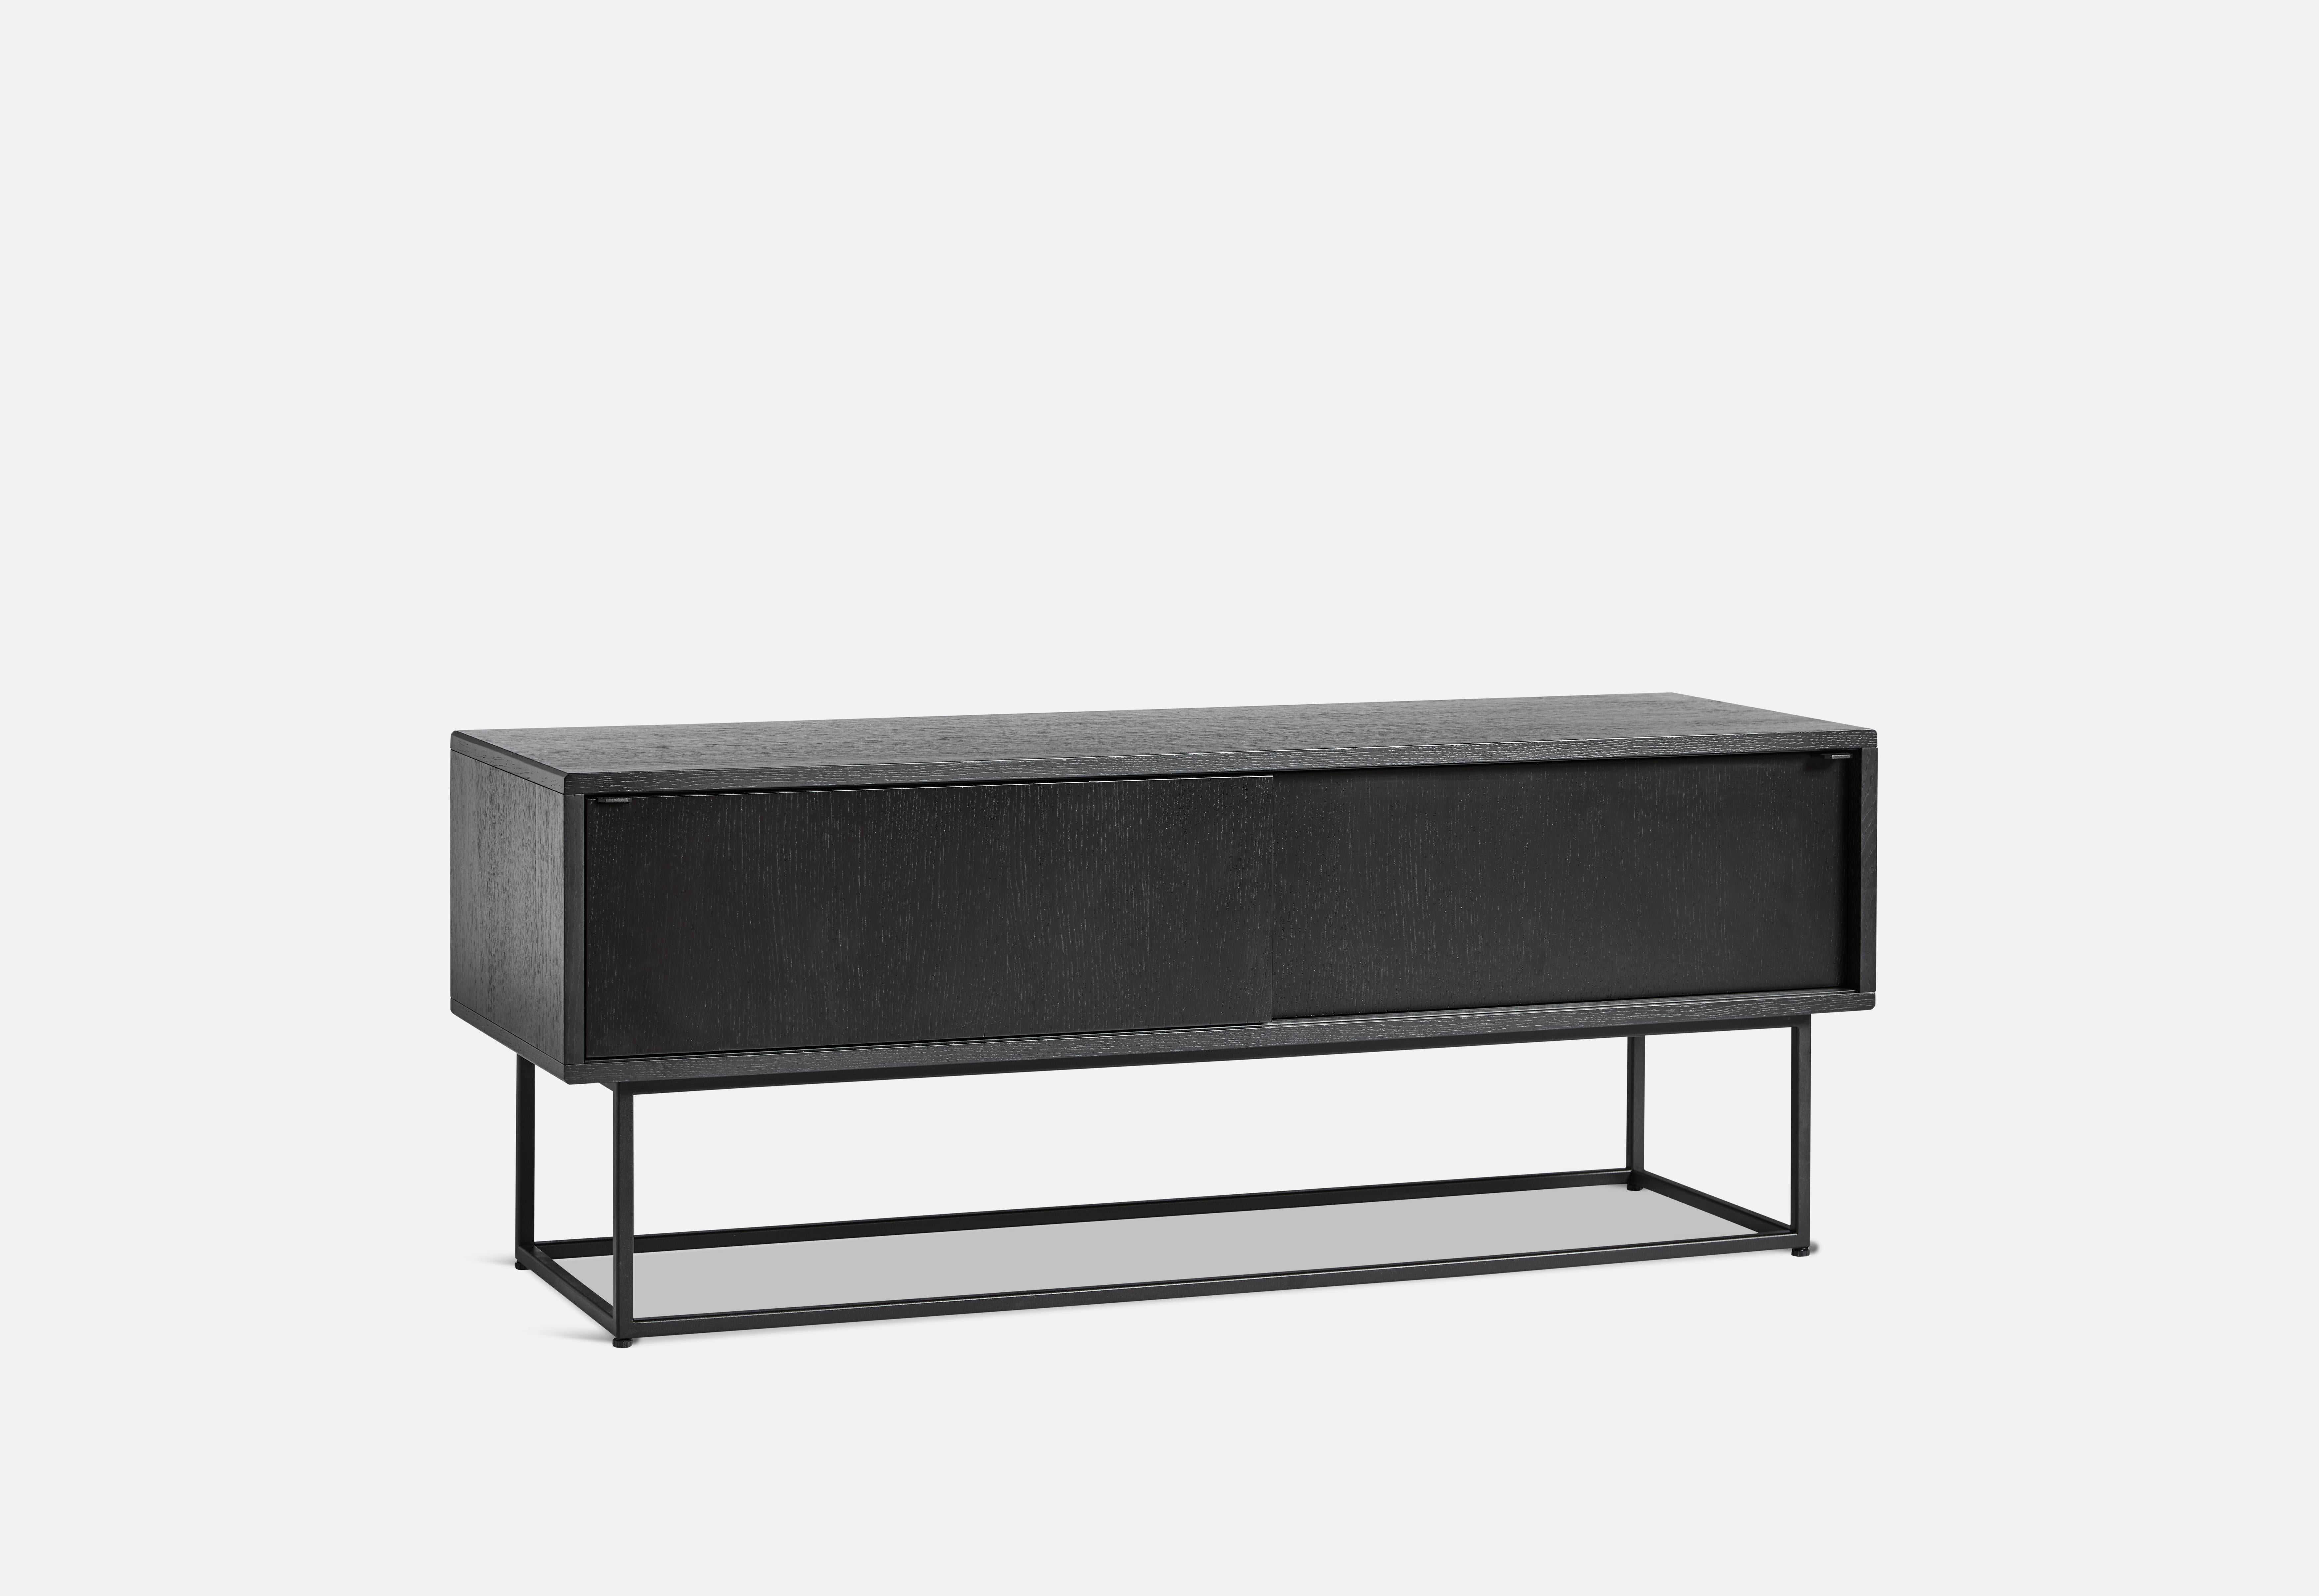 Black oak virka low sideboard by Ropke Design and Moaak.
Materials: Oak, metal.
Dimensions: D 40 x W 120 x H 47 cm.
Also available in different colours and materials.

The founders, Mia and Torben Koed, decided to put their 30 years of